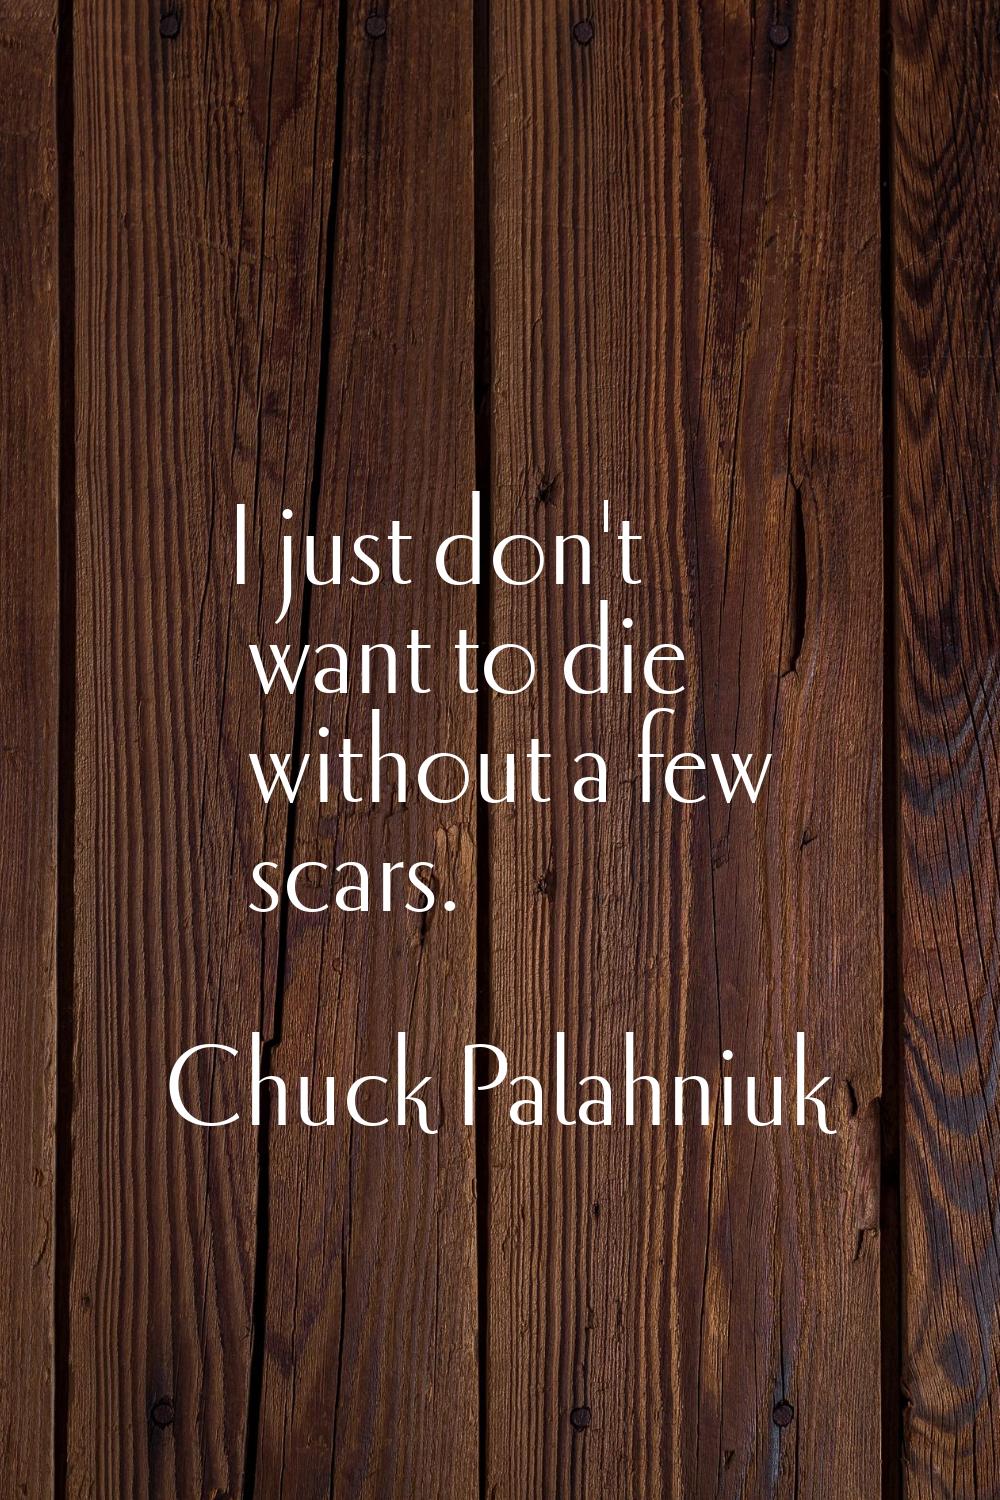 I just don't want to die without a few scars.